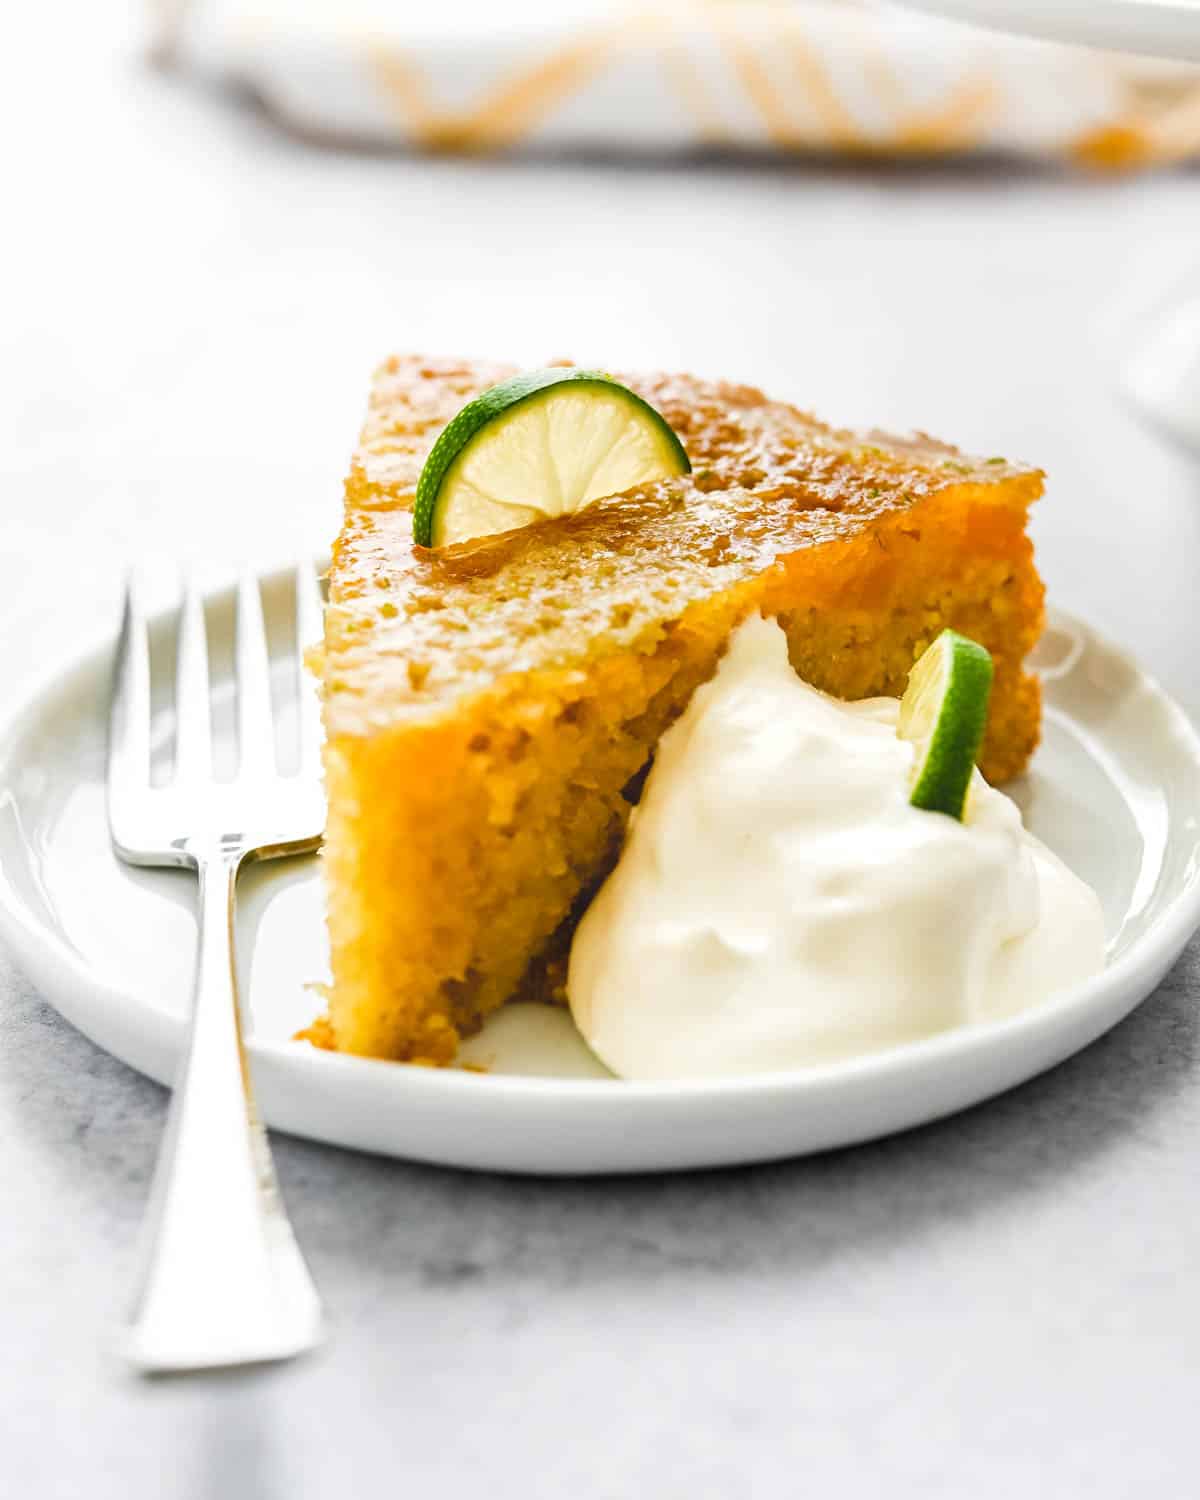 A slice of mango cake with a dollop of whipped cream.